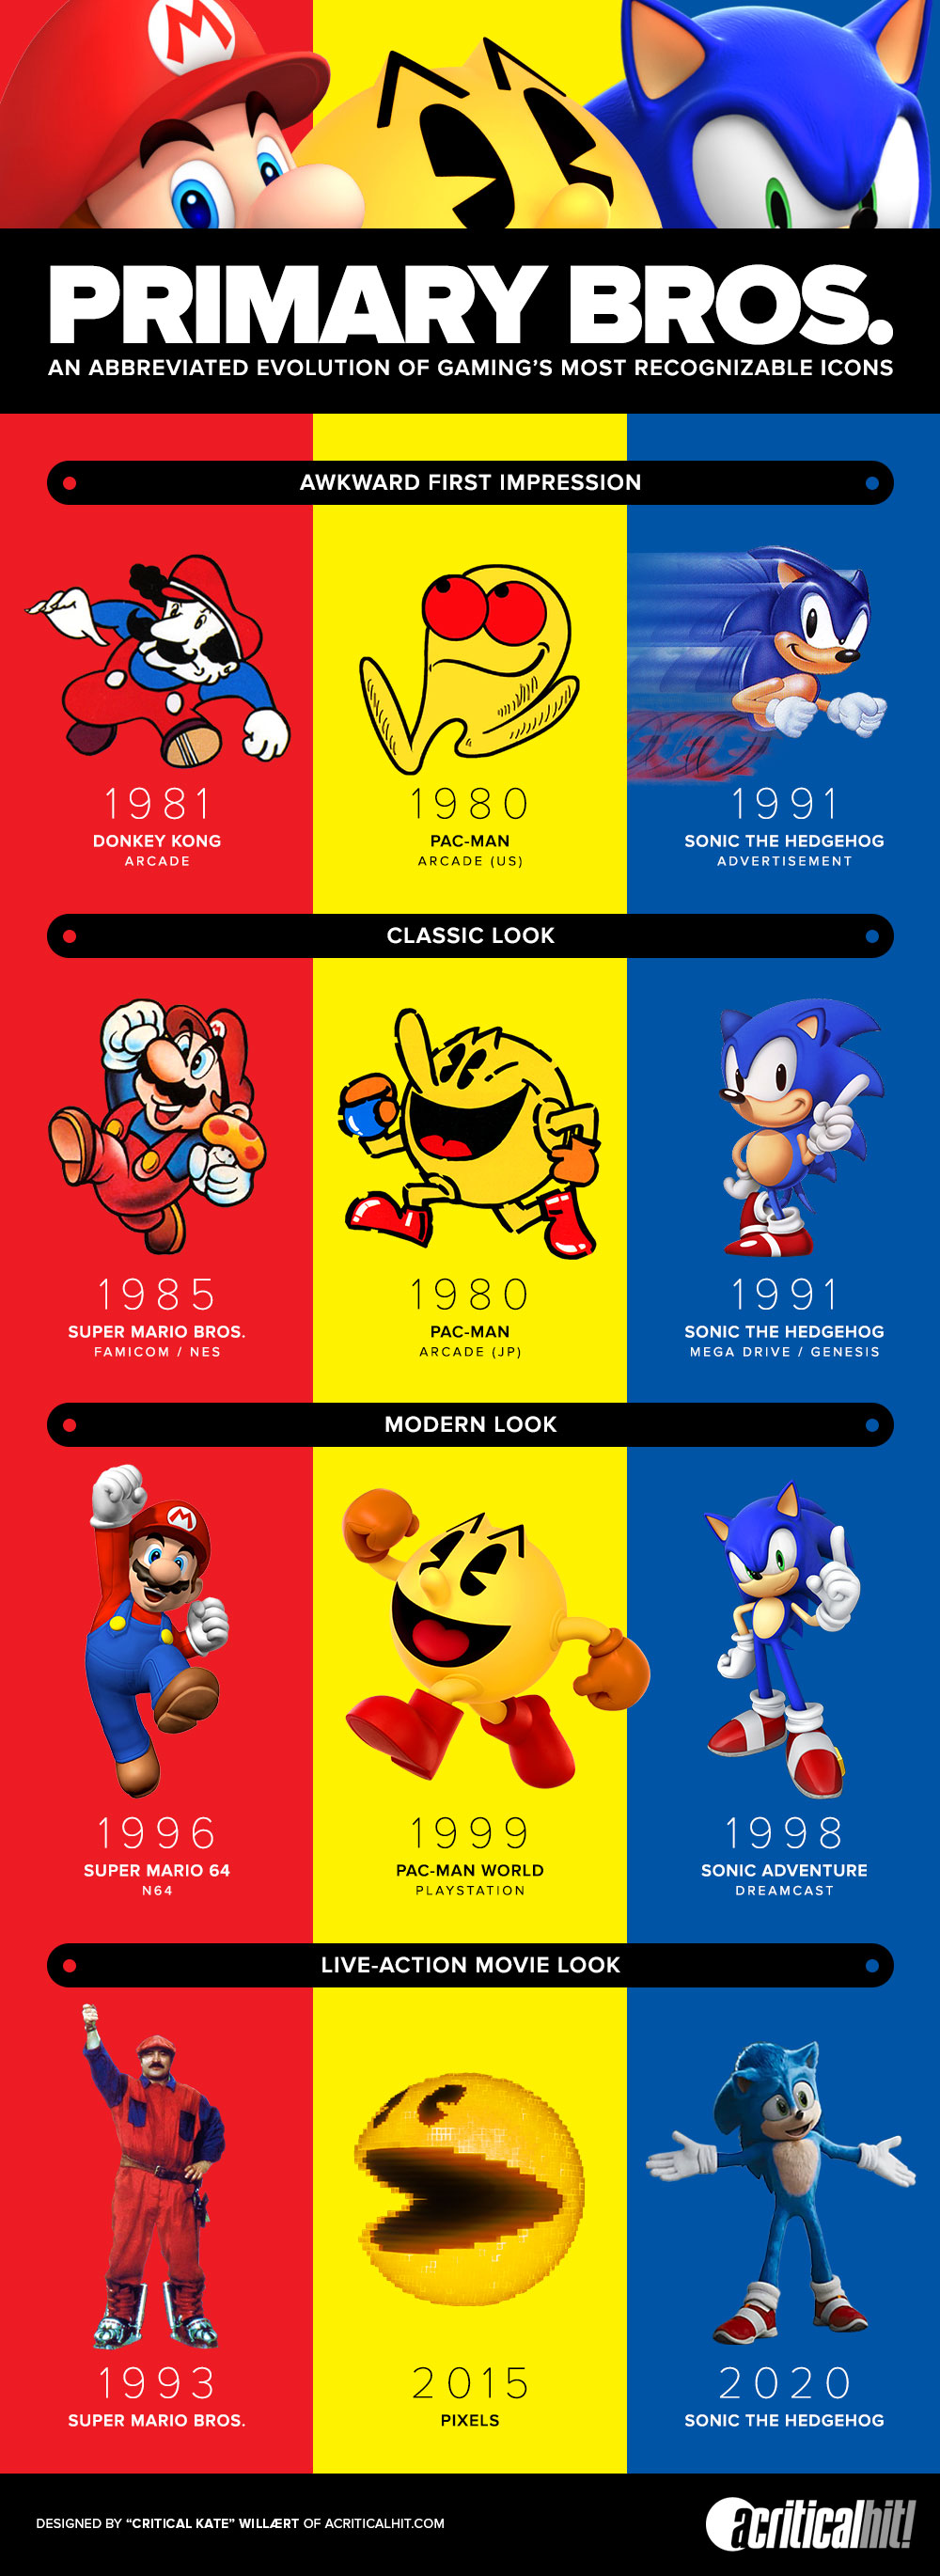 A visual comparison of different incarnations of Mario, Pac-Man, and Sonic.